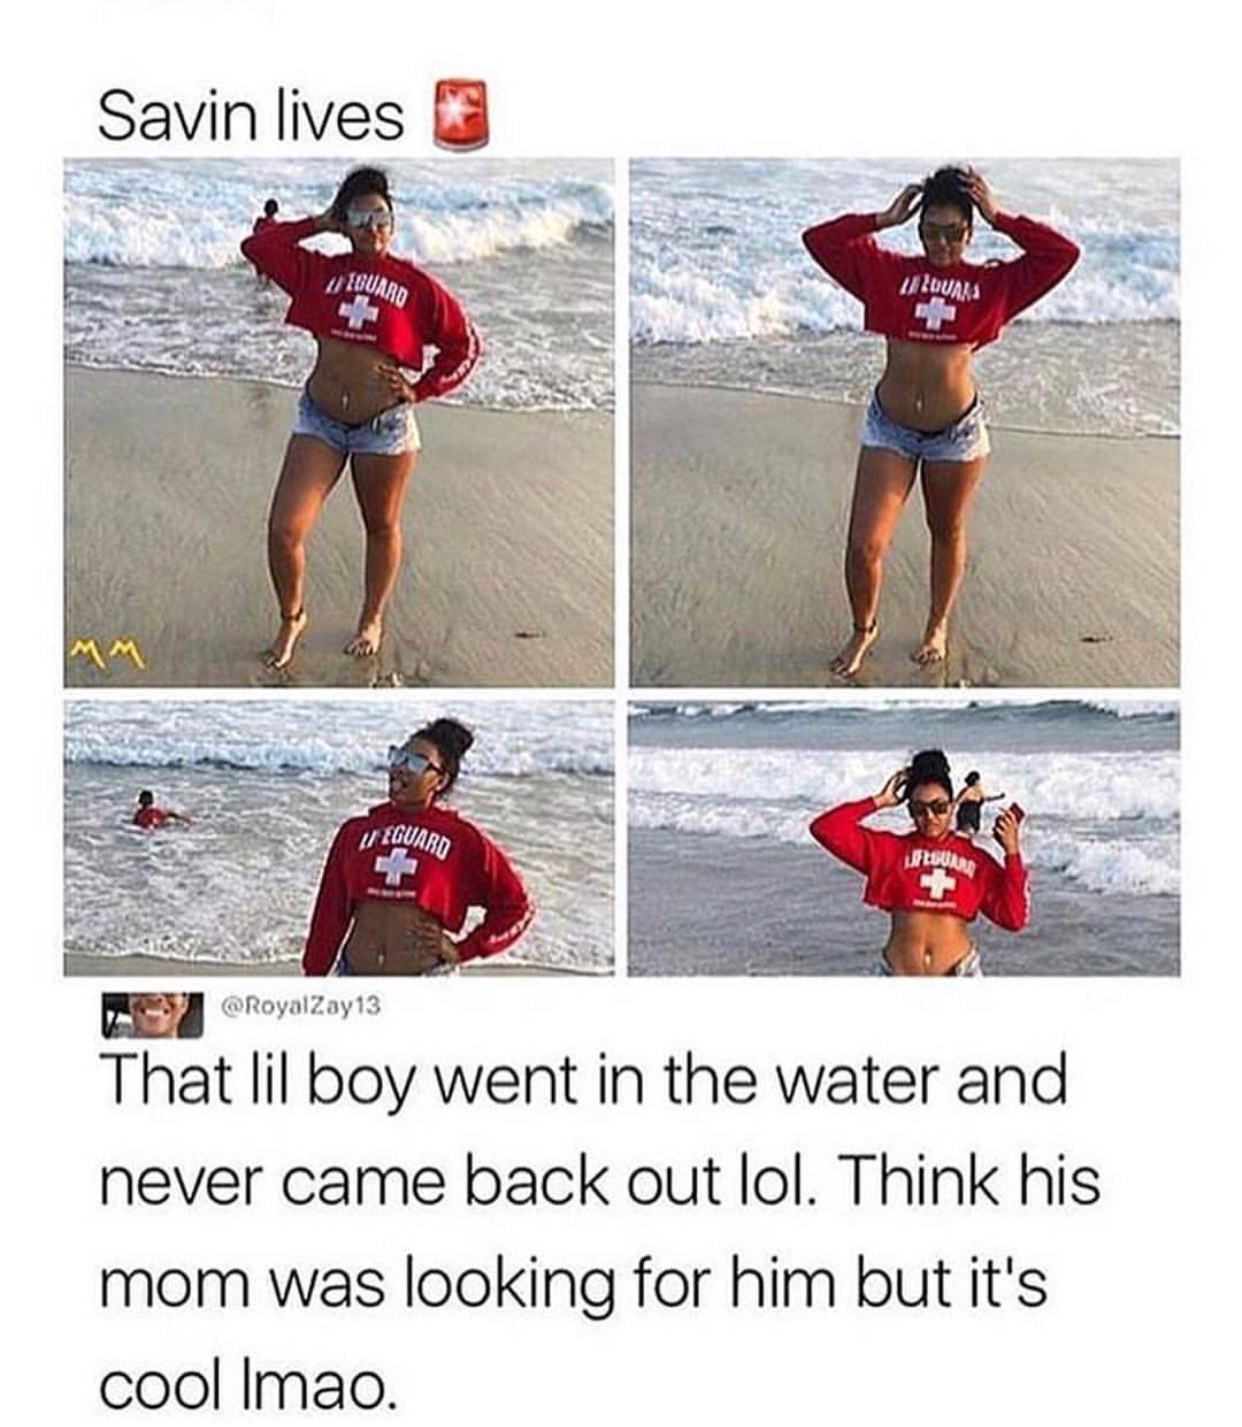 positano meme - Savin lives 11 Iguard Luuaks Lieguard Larguras That lil boy went in the water and never came back out lol. Think his mom was looking for him but it's cool Imao.